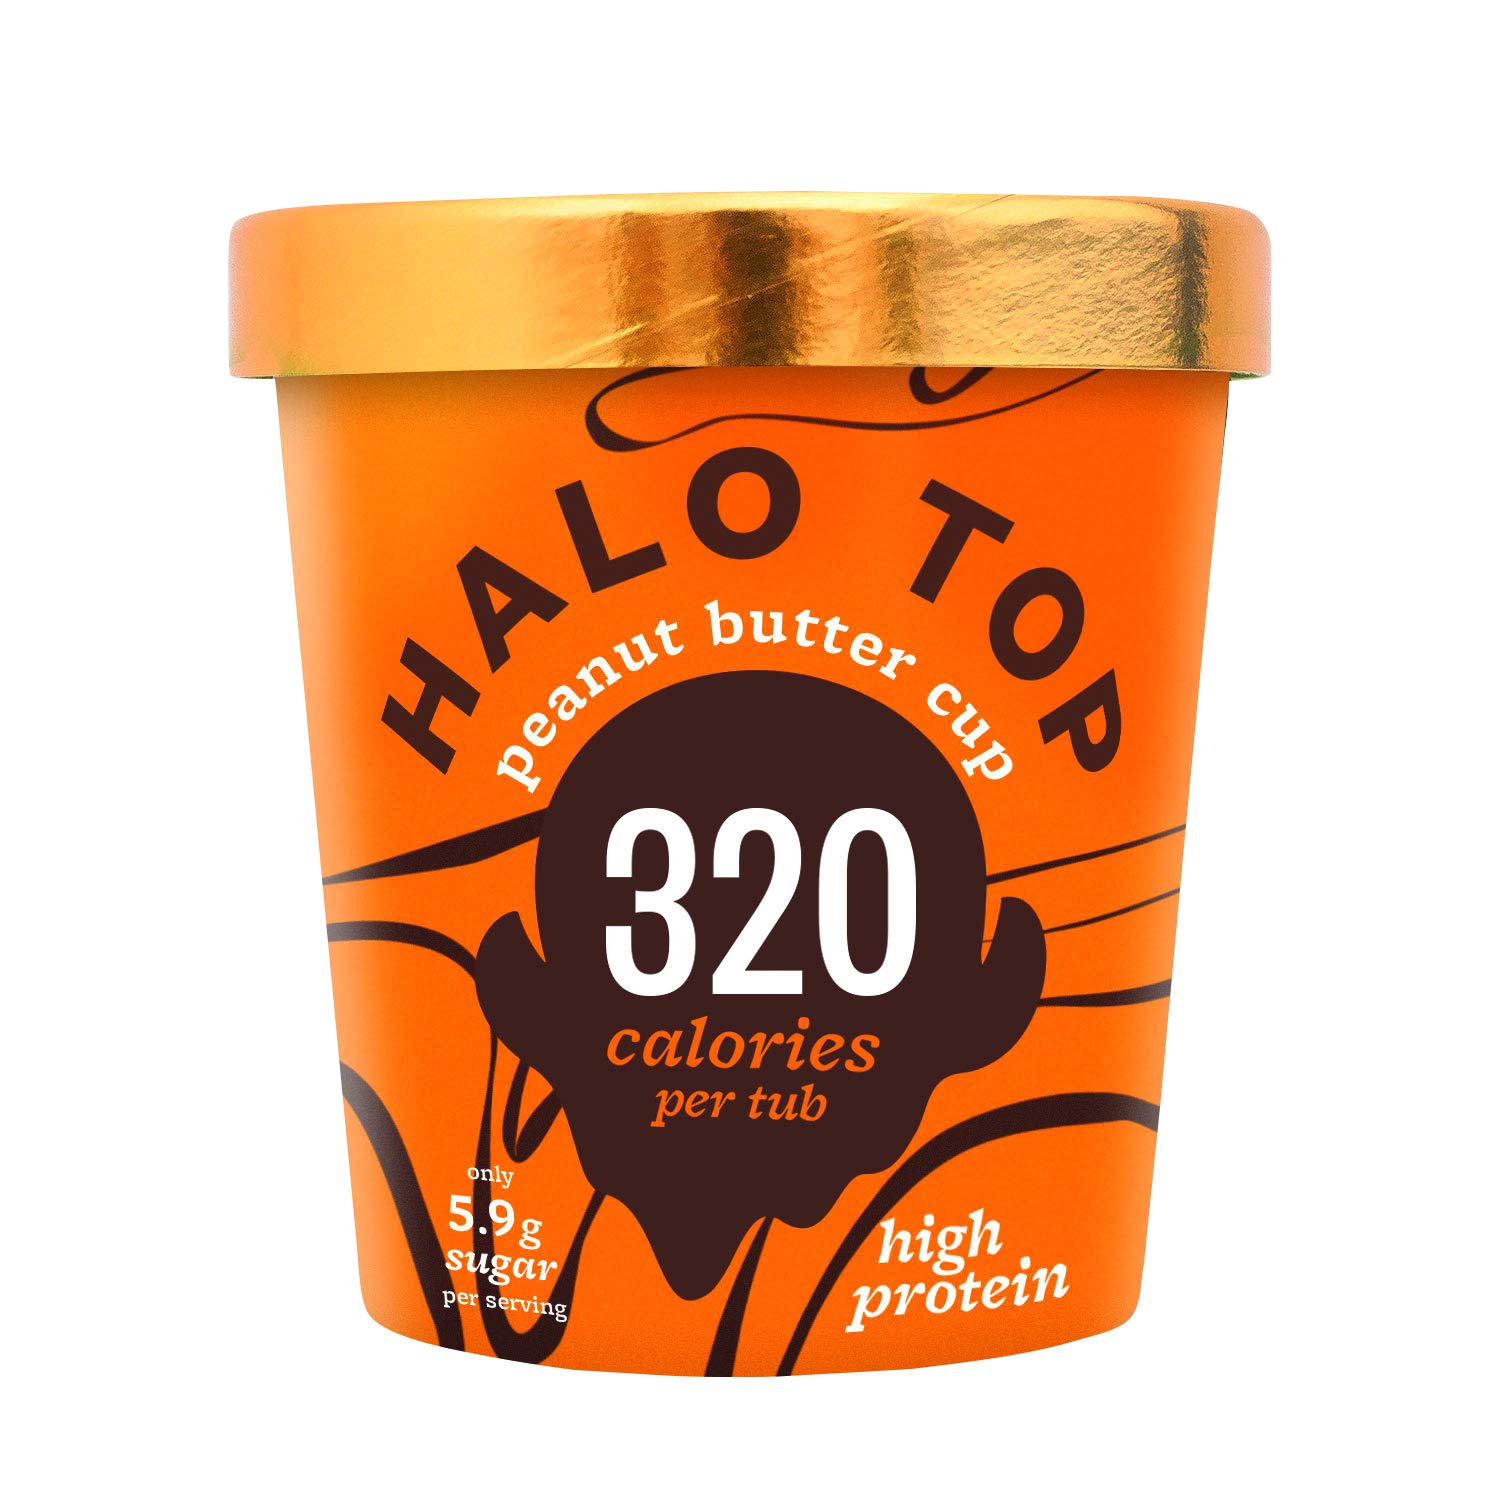 HALO TOP Peanut Butter Cup, 473ml - Hight Protein